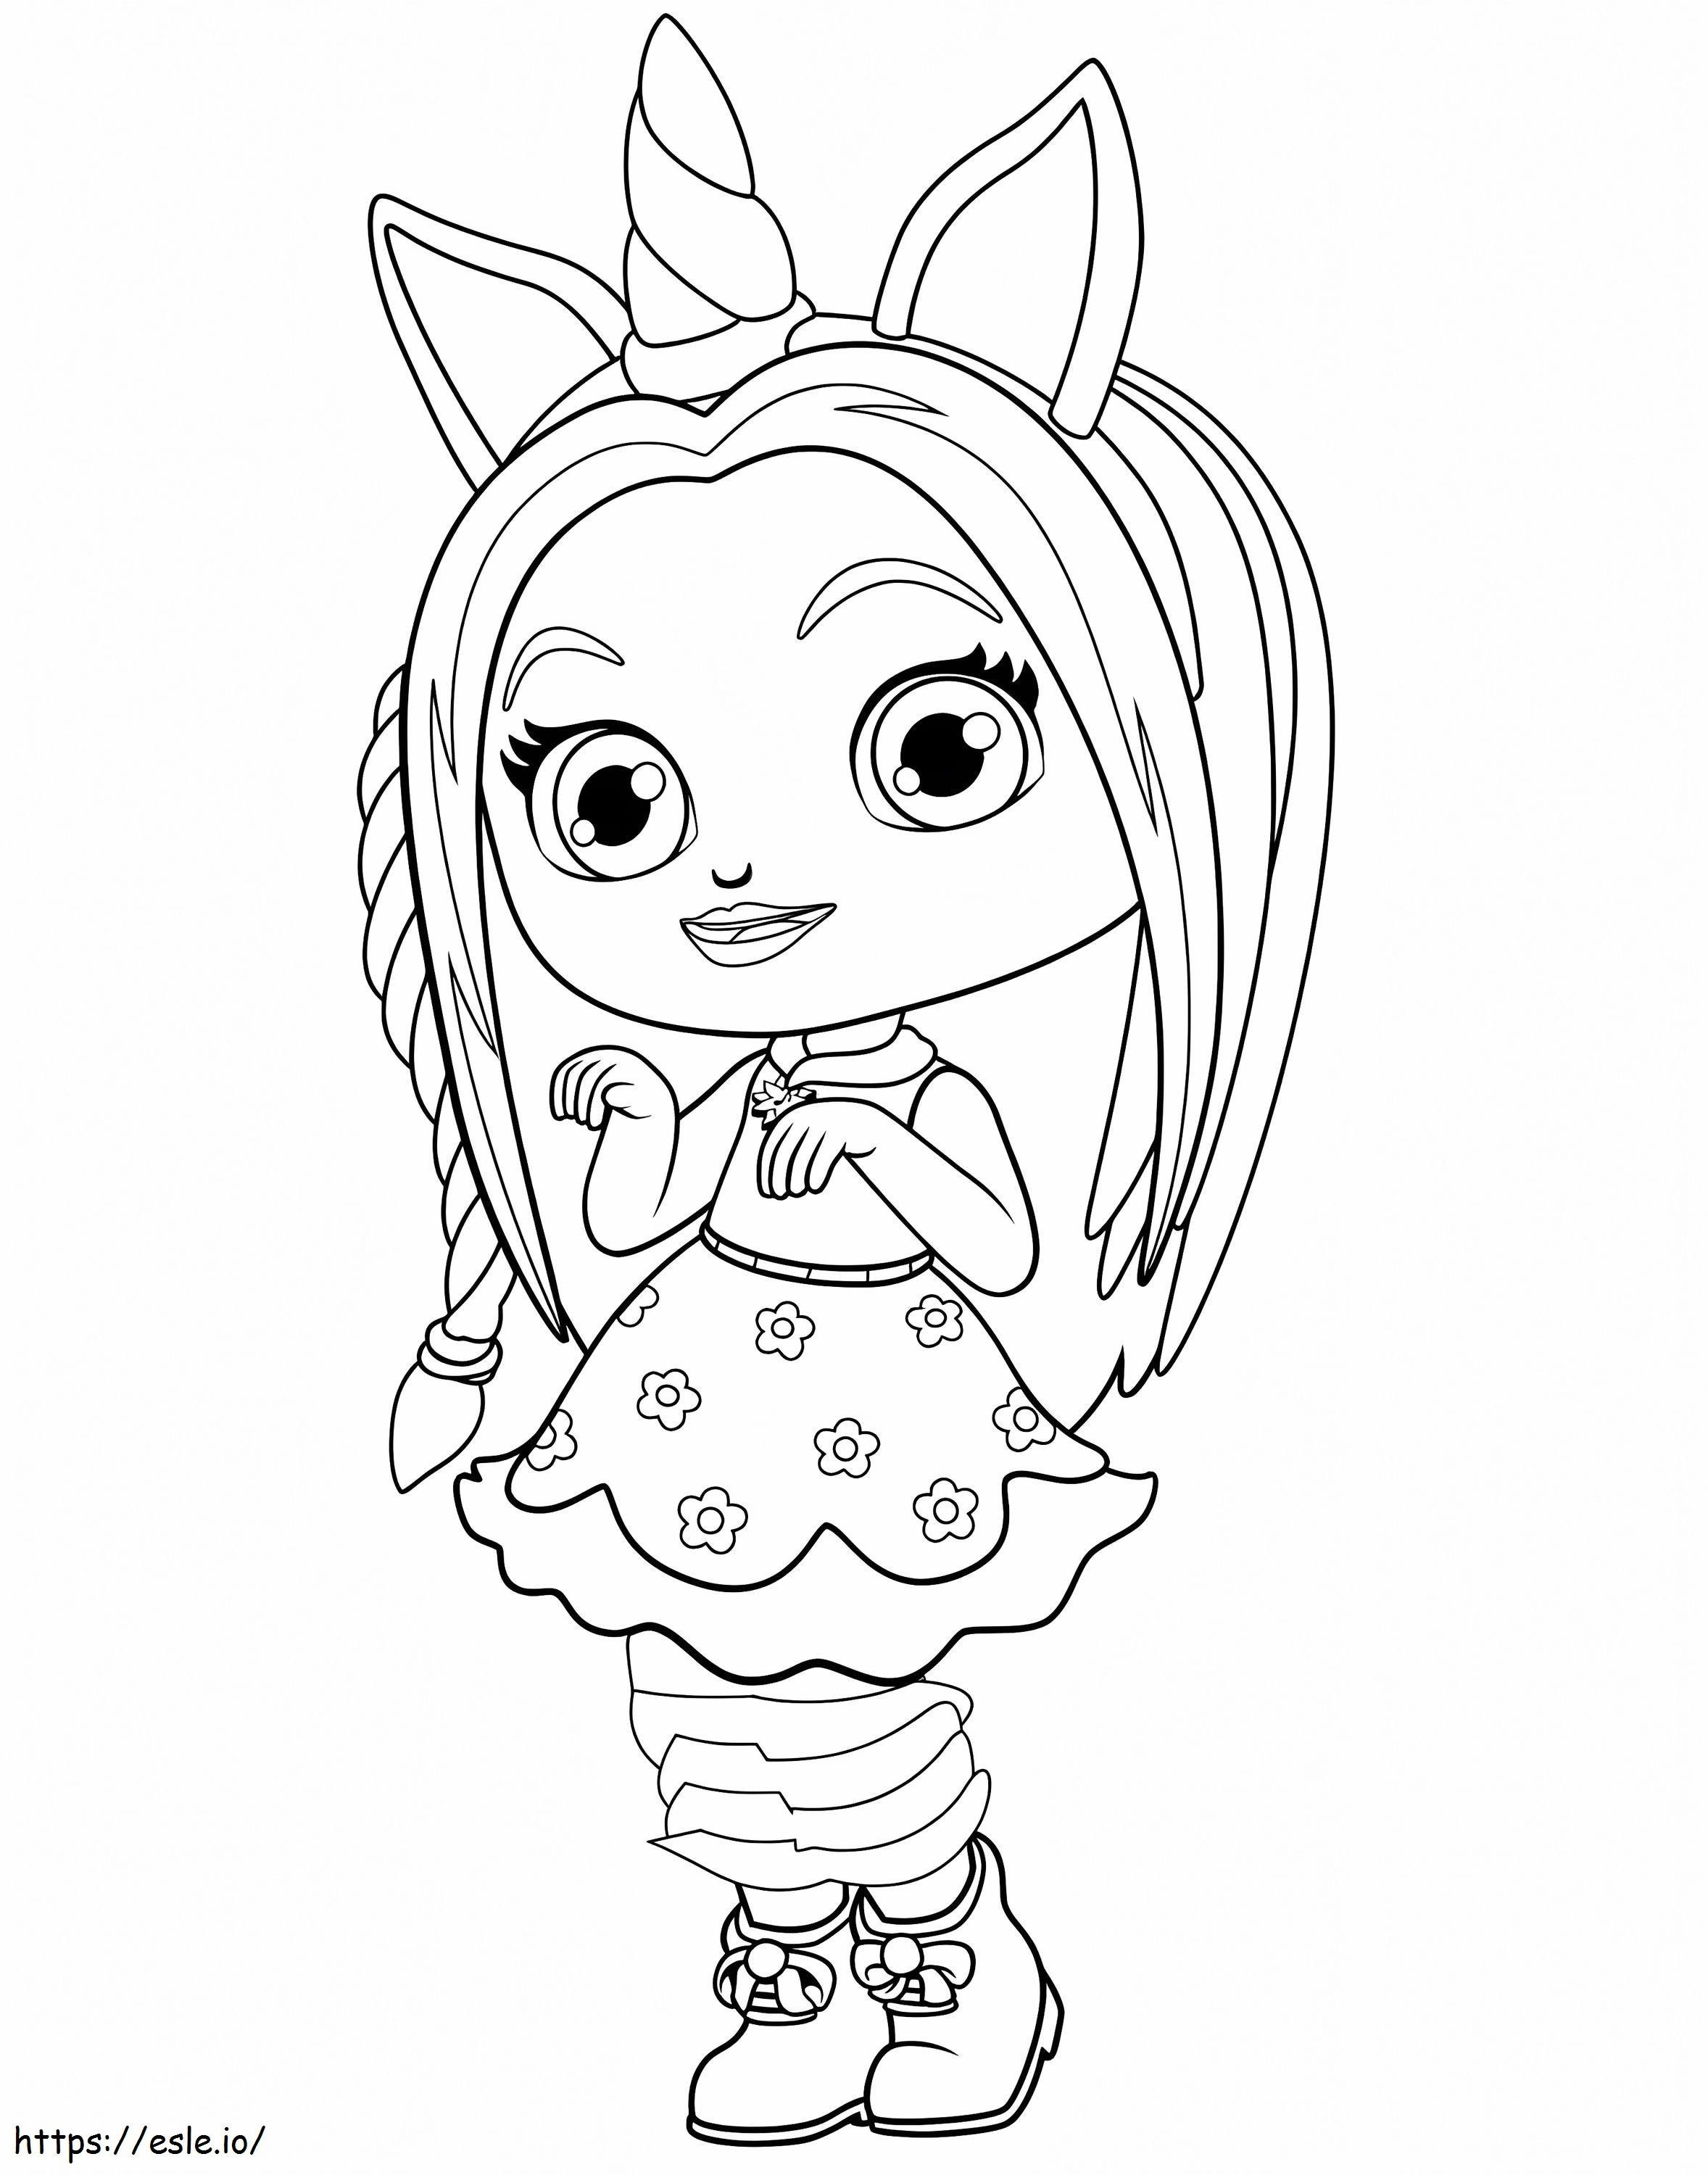 Posie From Little Charmers coloring page